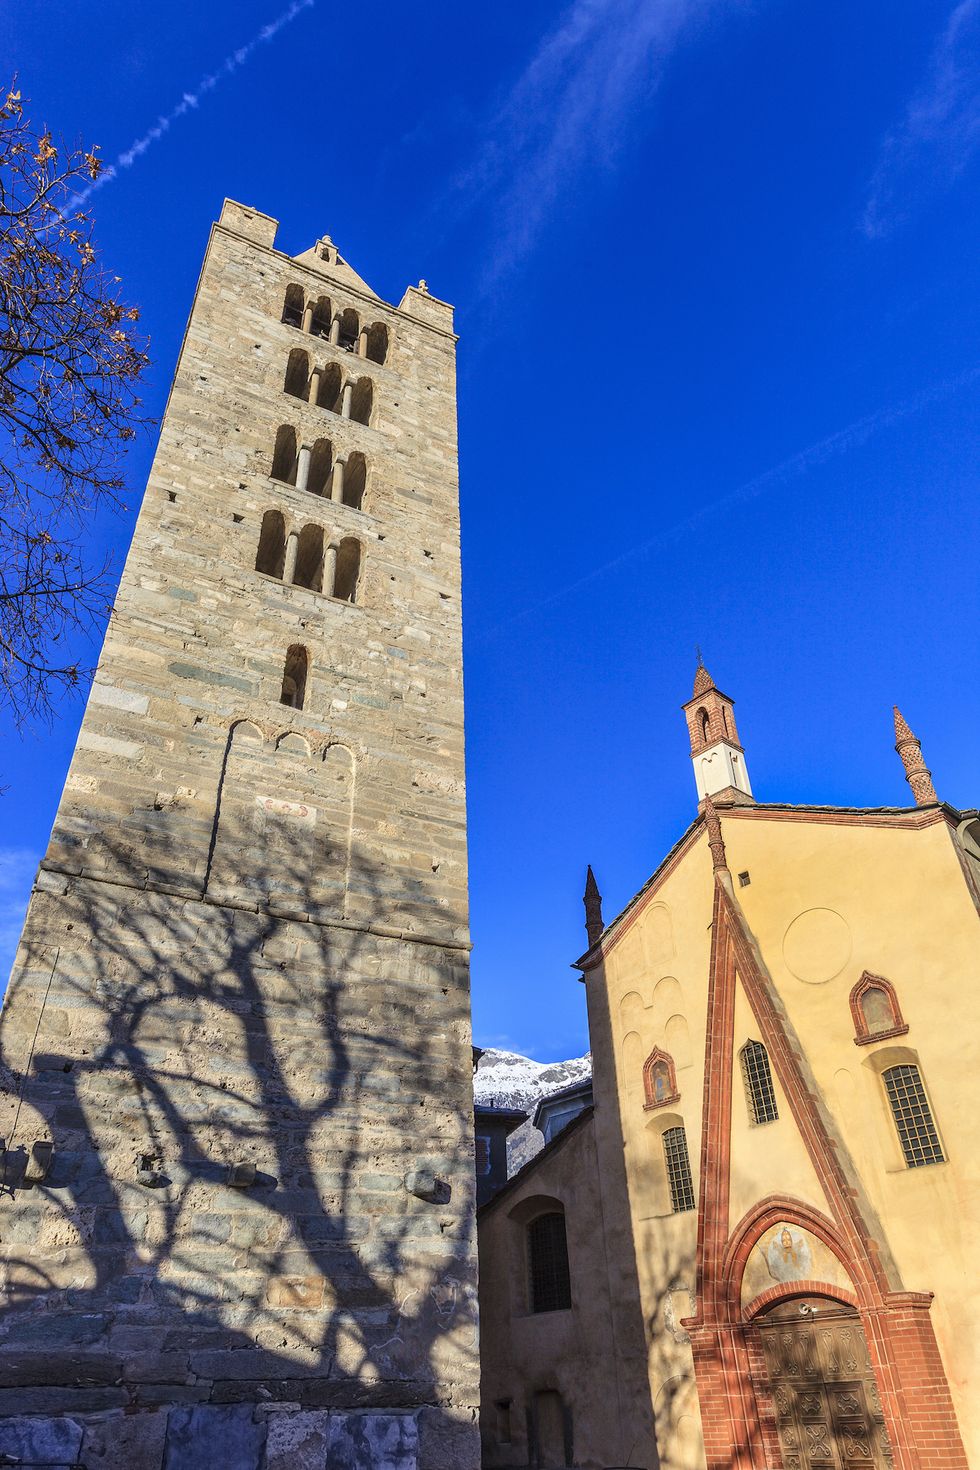 Blue, Sky, Architecture, Wall, Brick, Medieval architecture, Brickwork, Tower, Chapel, Place of worship, 